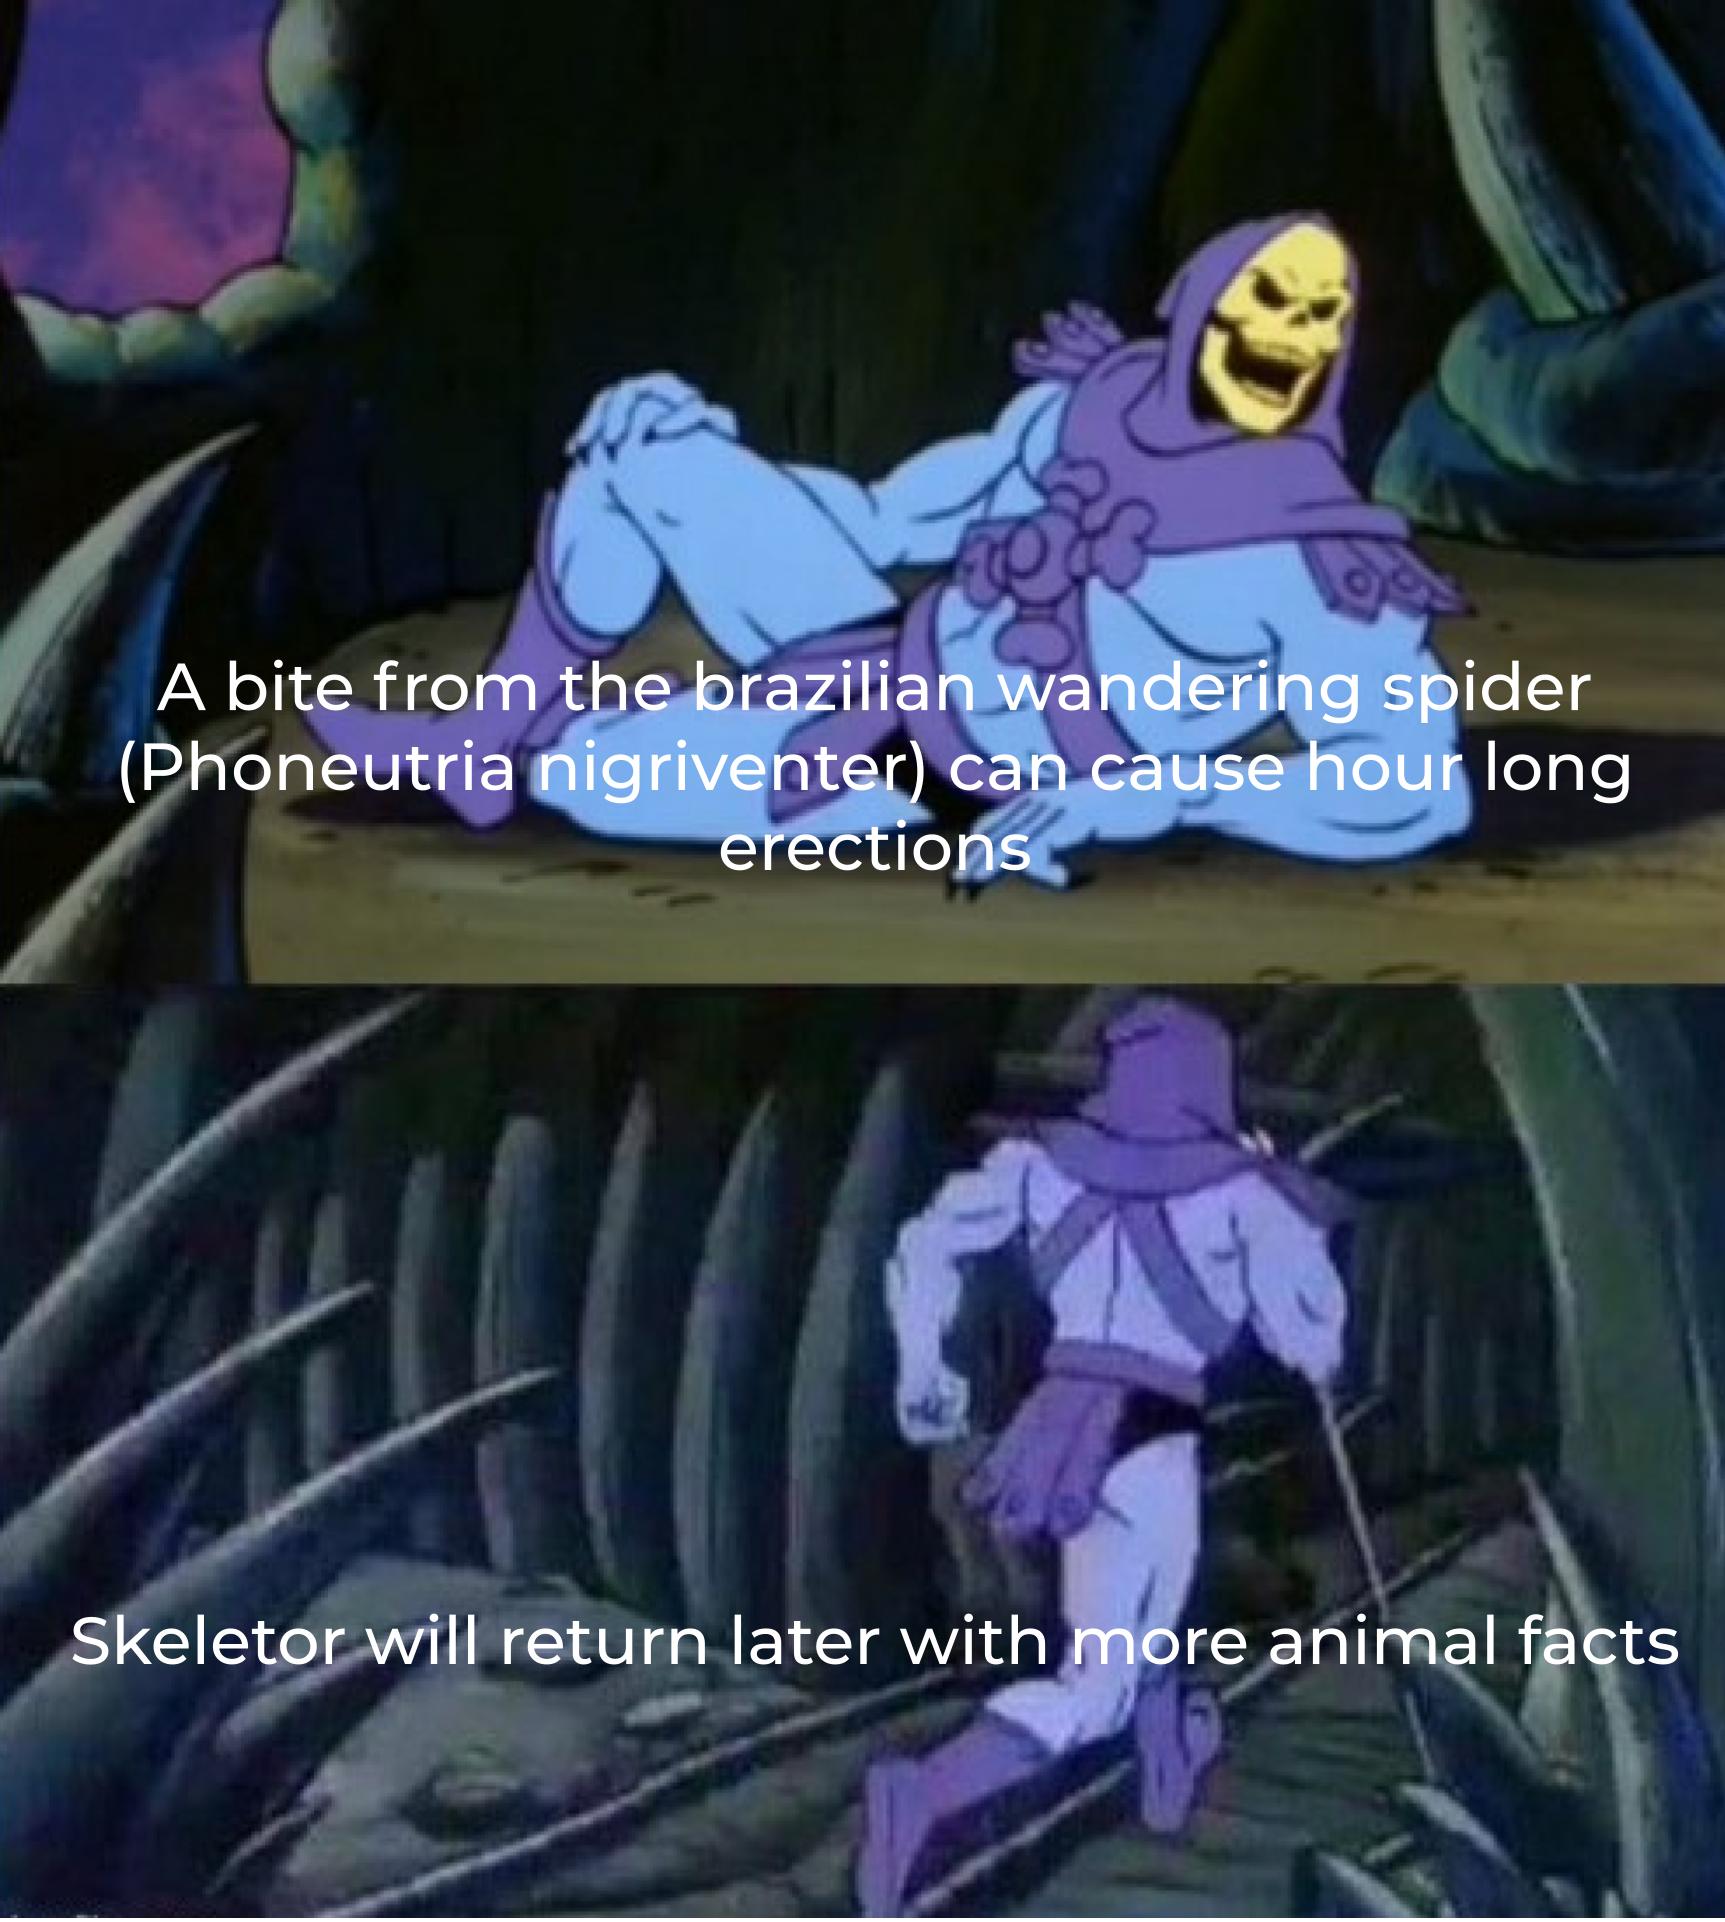 funny memes - dank memes -skeletor meme - A bite from the brazilian wandering spider Phoneutria nigriventer can cause hour long erections Skeletor will return later with more animal facts